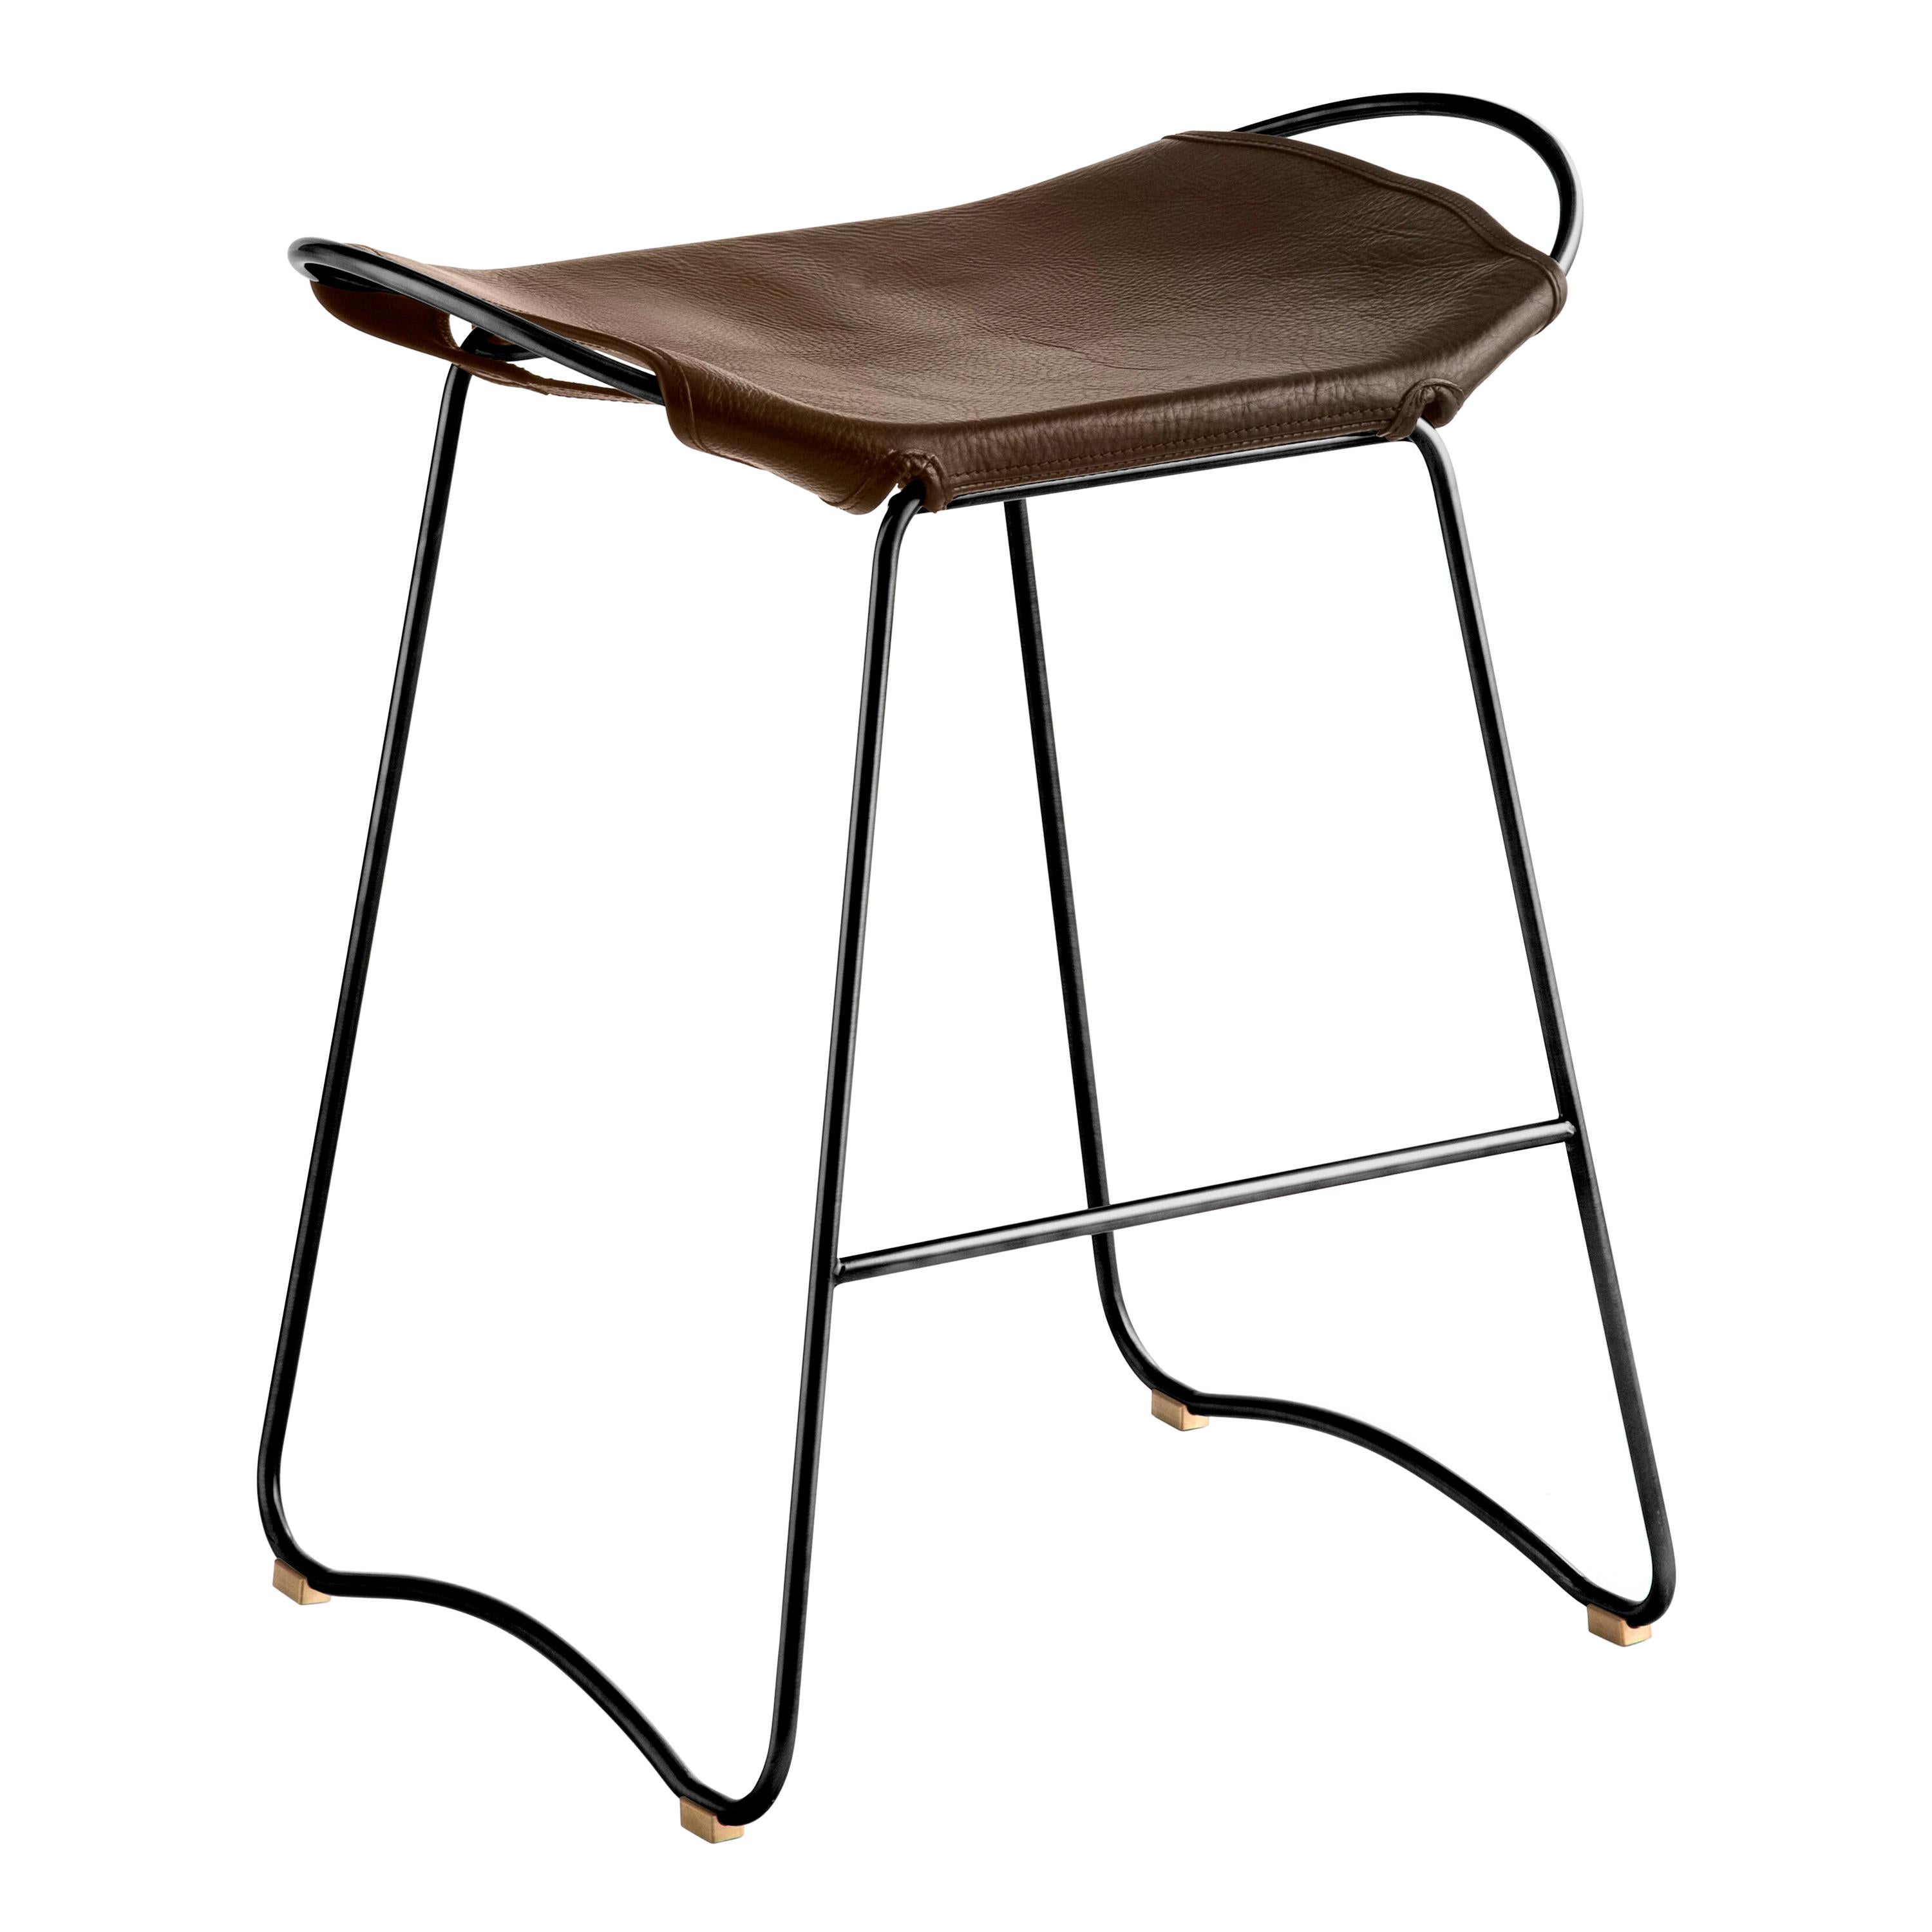 The Hug contemporary barstool is designed and conceived with a light aesthetic, the slight oscillation of the steel rod of 12 mm is complemented by the flexibility of the double 3.5 mm thick leather. When sitting in this furniture you feel an